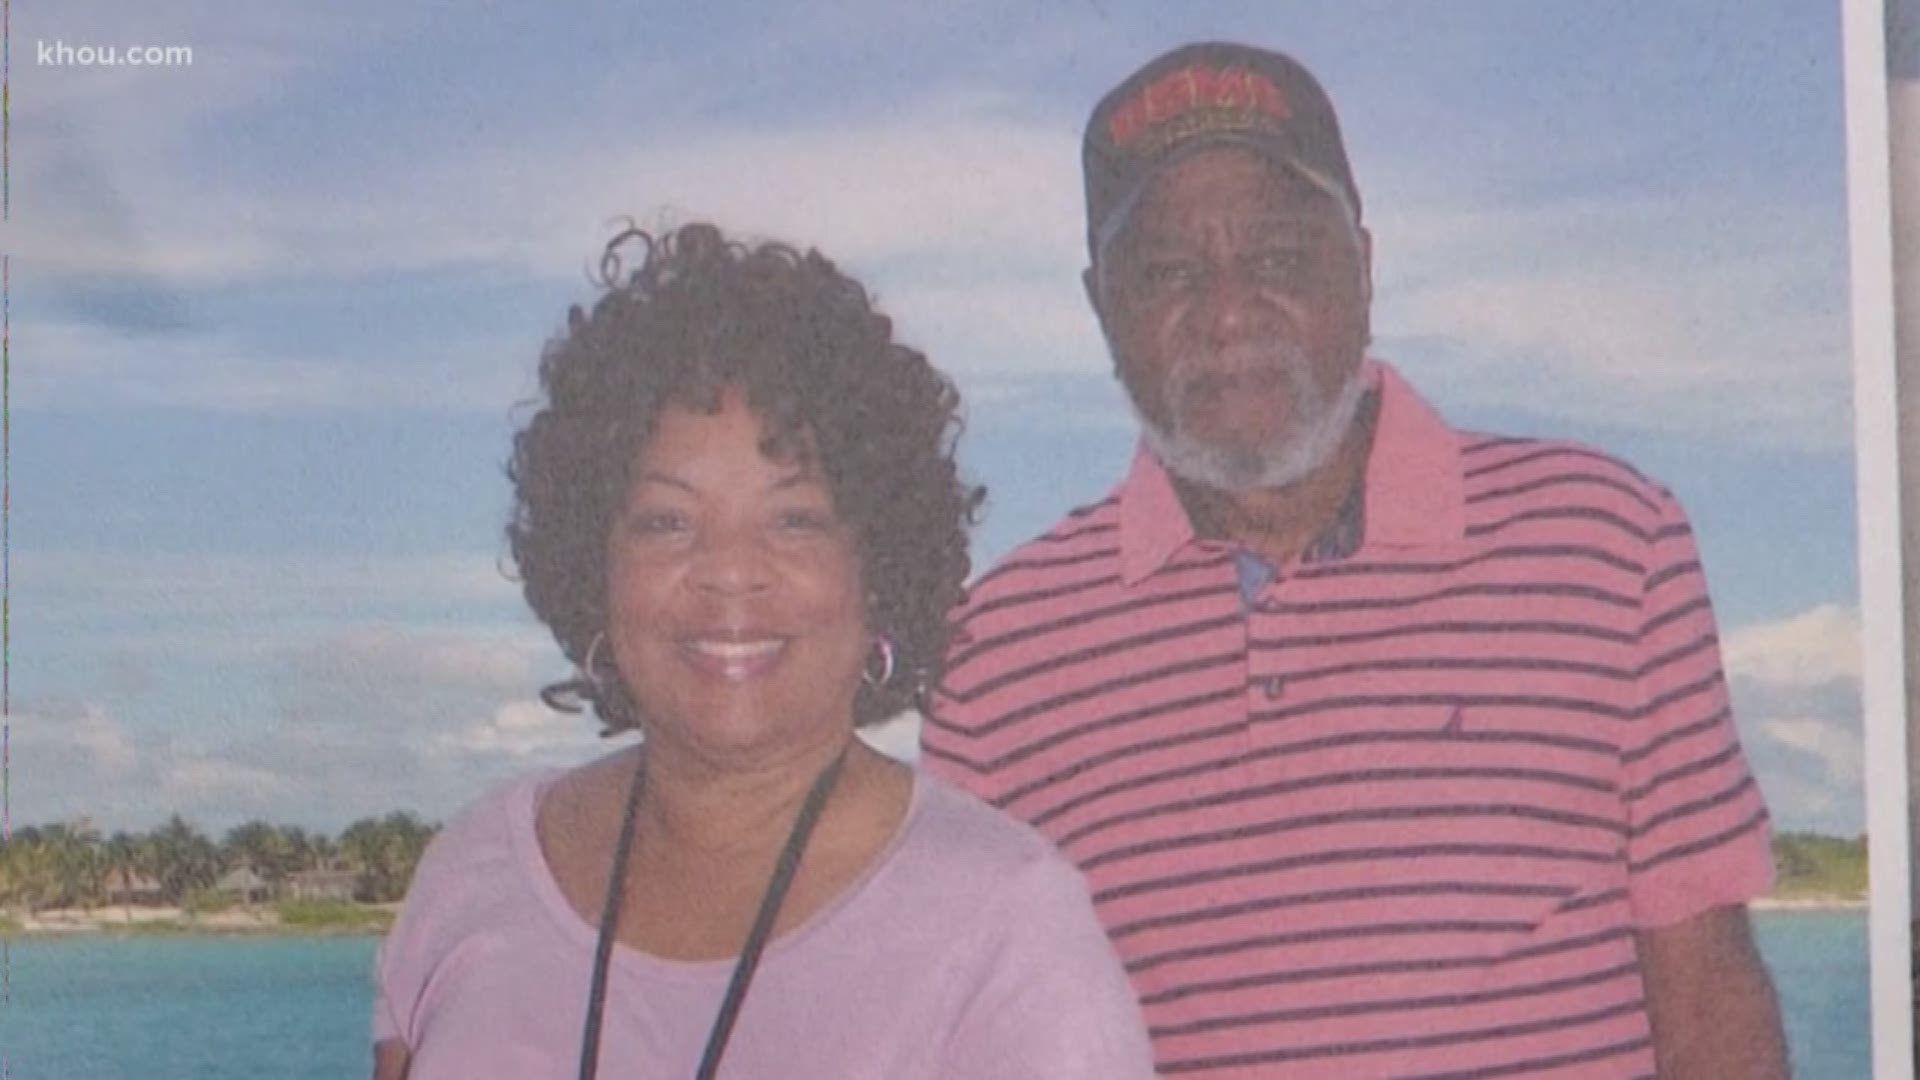 One of the victims in the horrific Grand Parkway crash Wednesday was a retired grandfather who served as a Marine in Vietnam. Michael Brown, 78, was known for being kind and greeting everyone in his Humble neighborhood with a smile.